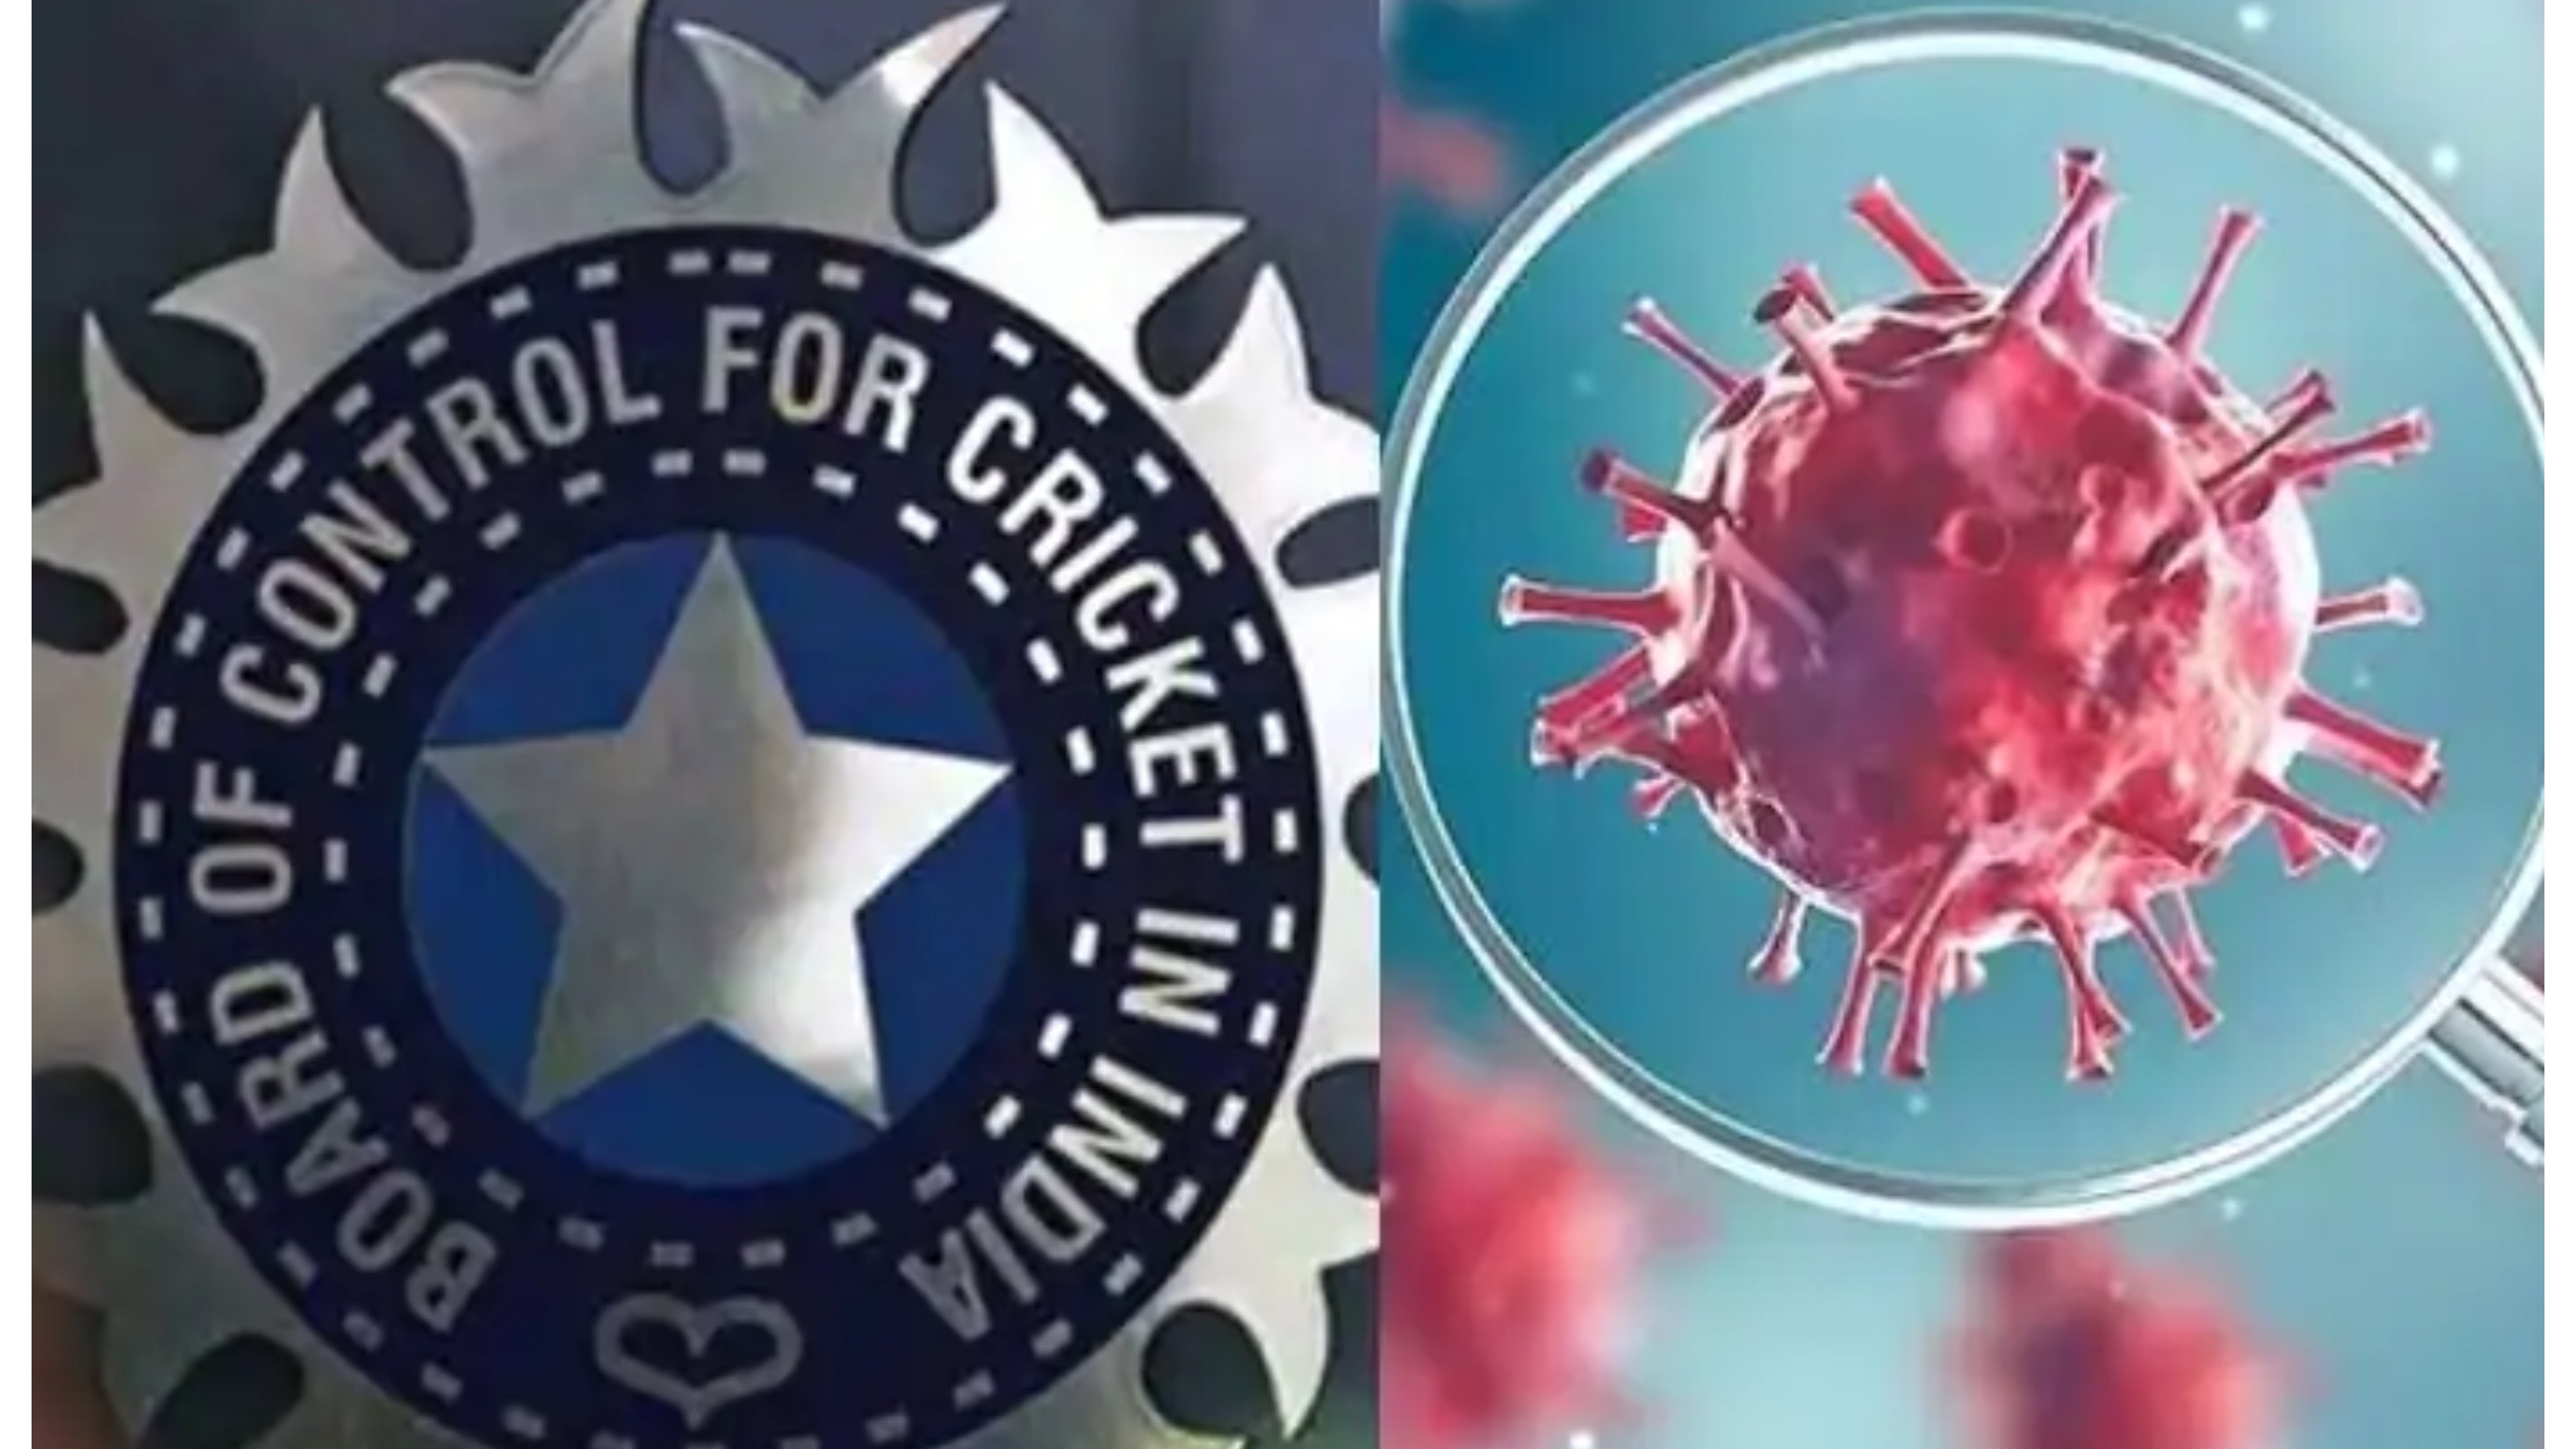 IPL 2020: One member of BCCI’s medical team tests positive for COVID-19 in UAE, claims report